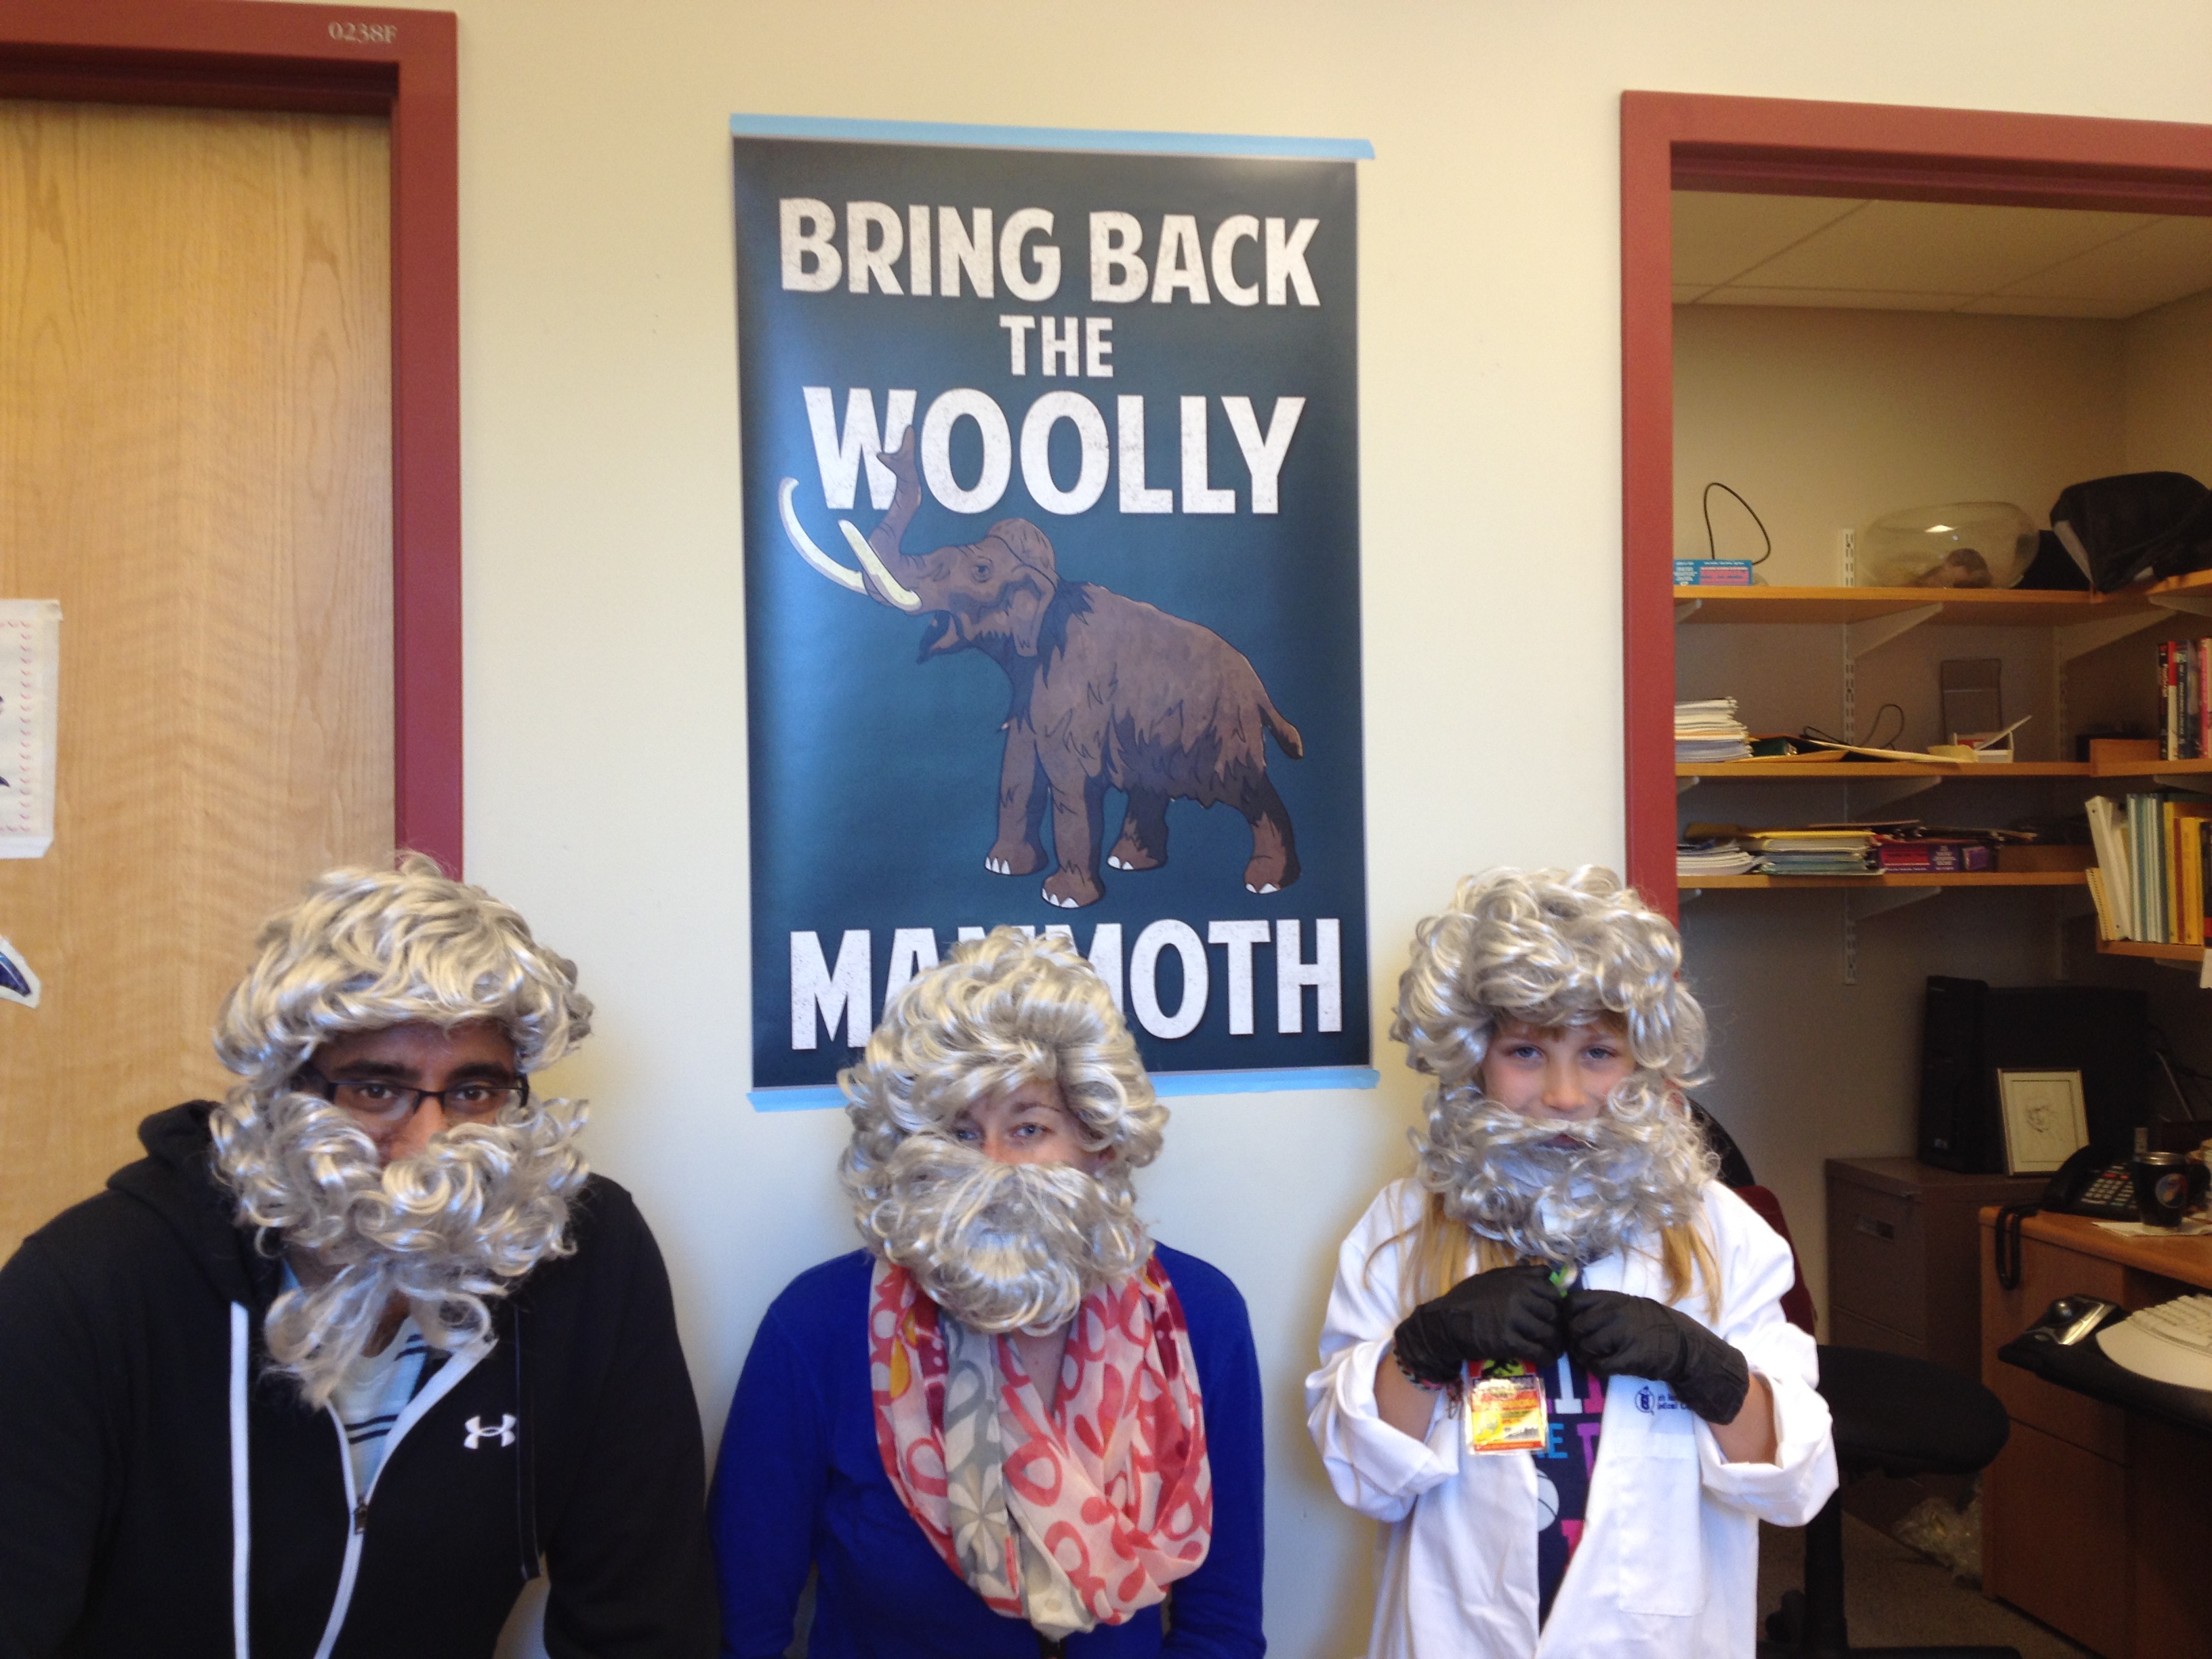 Scientists have fun in George Church beards with a young woolly mammoth enthusiast on a tour of the lab